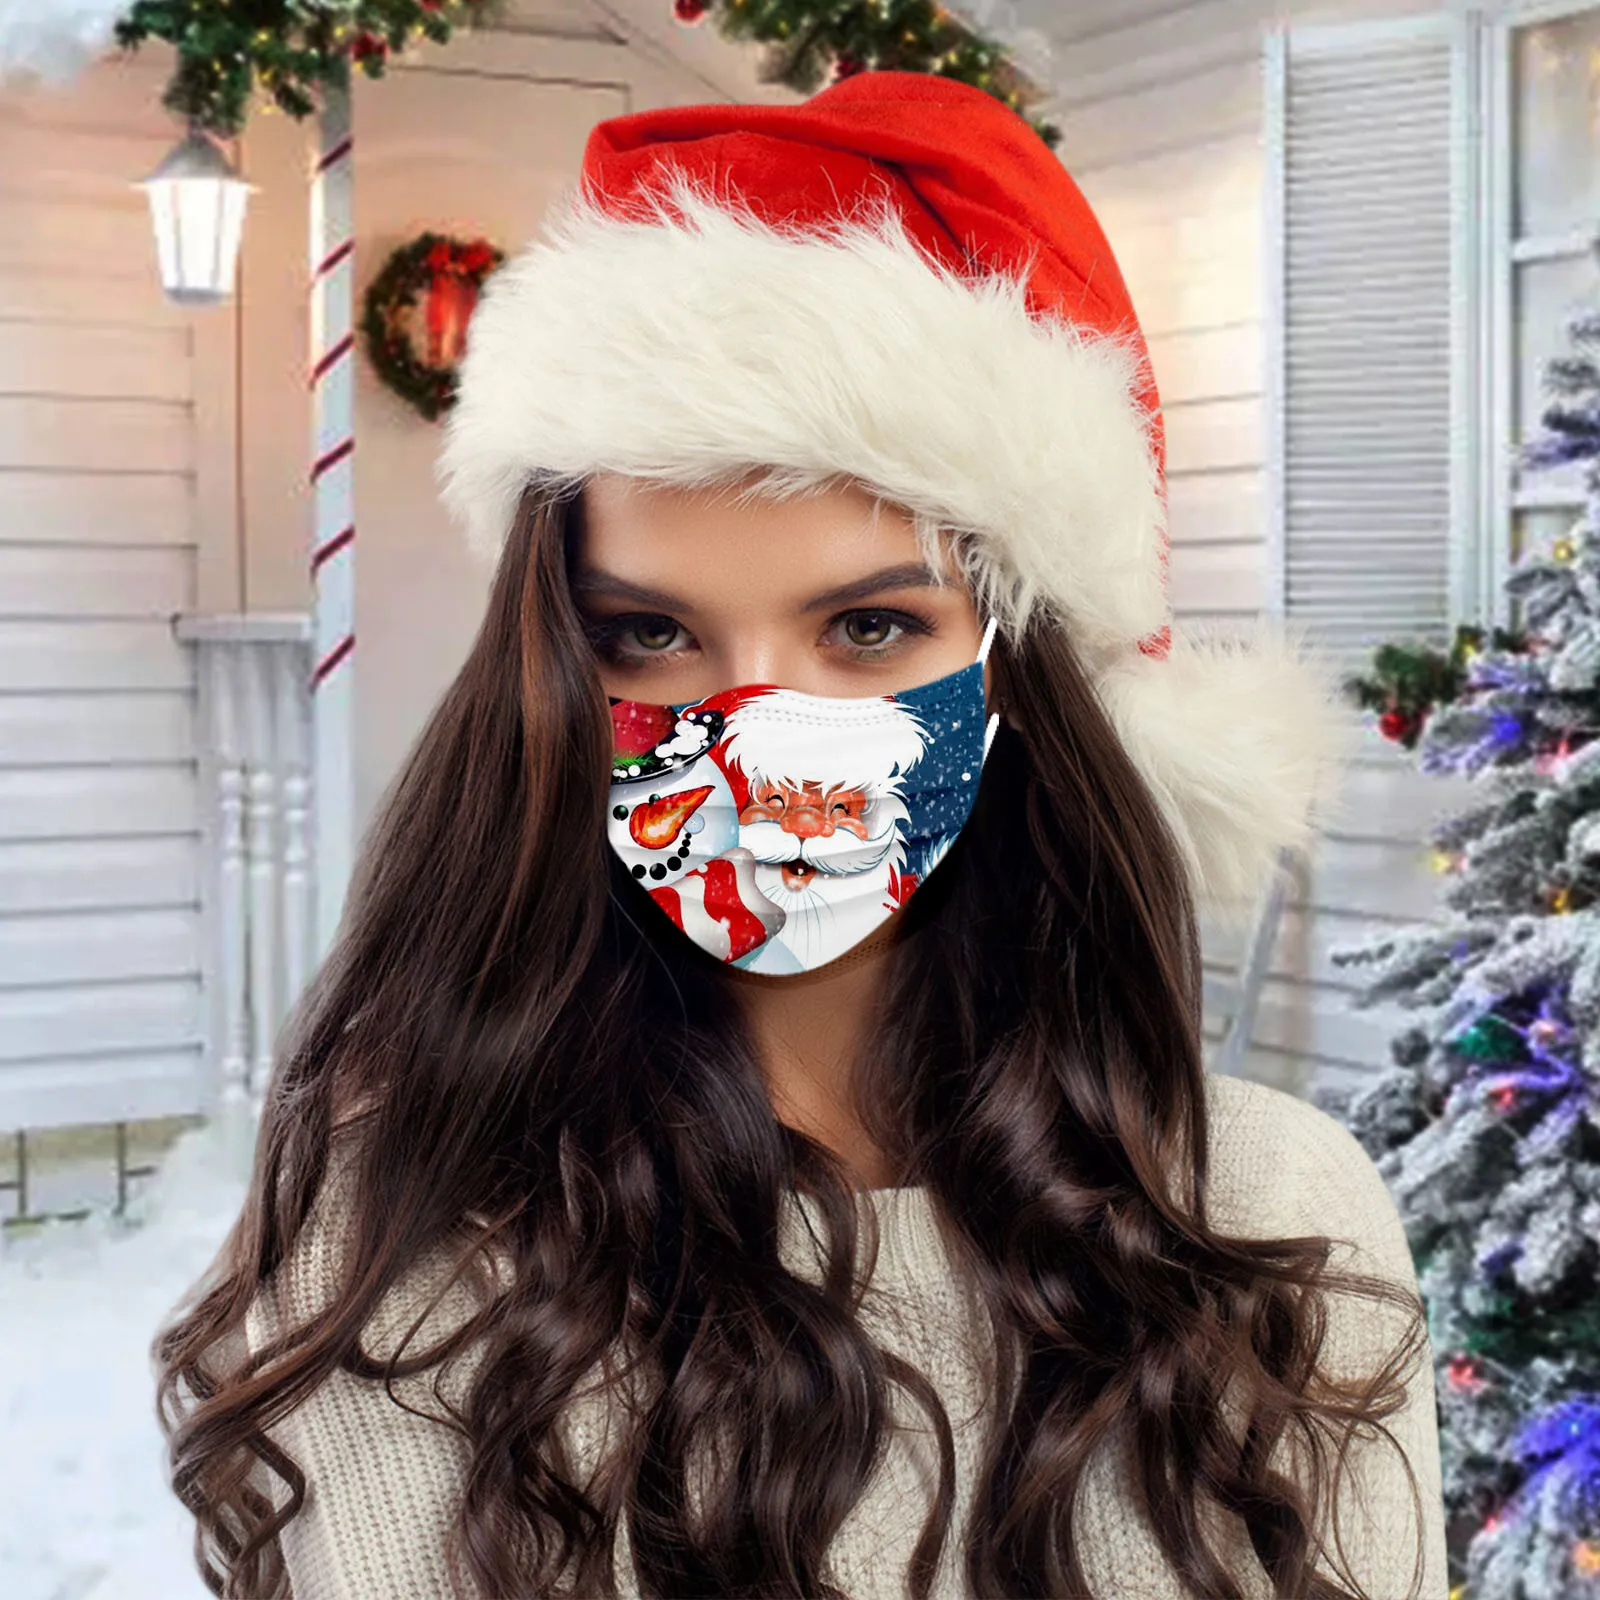 

10pcs Christmas 3ply Filters Mask Decoration For Face Disposable Fashion Mouth Cover Navidad Mascaras Print Halloween Cosplay